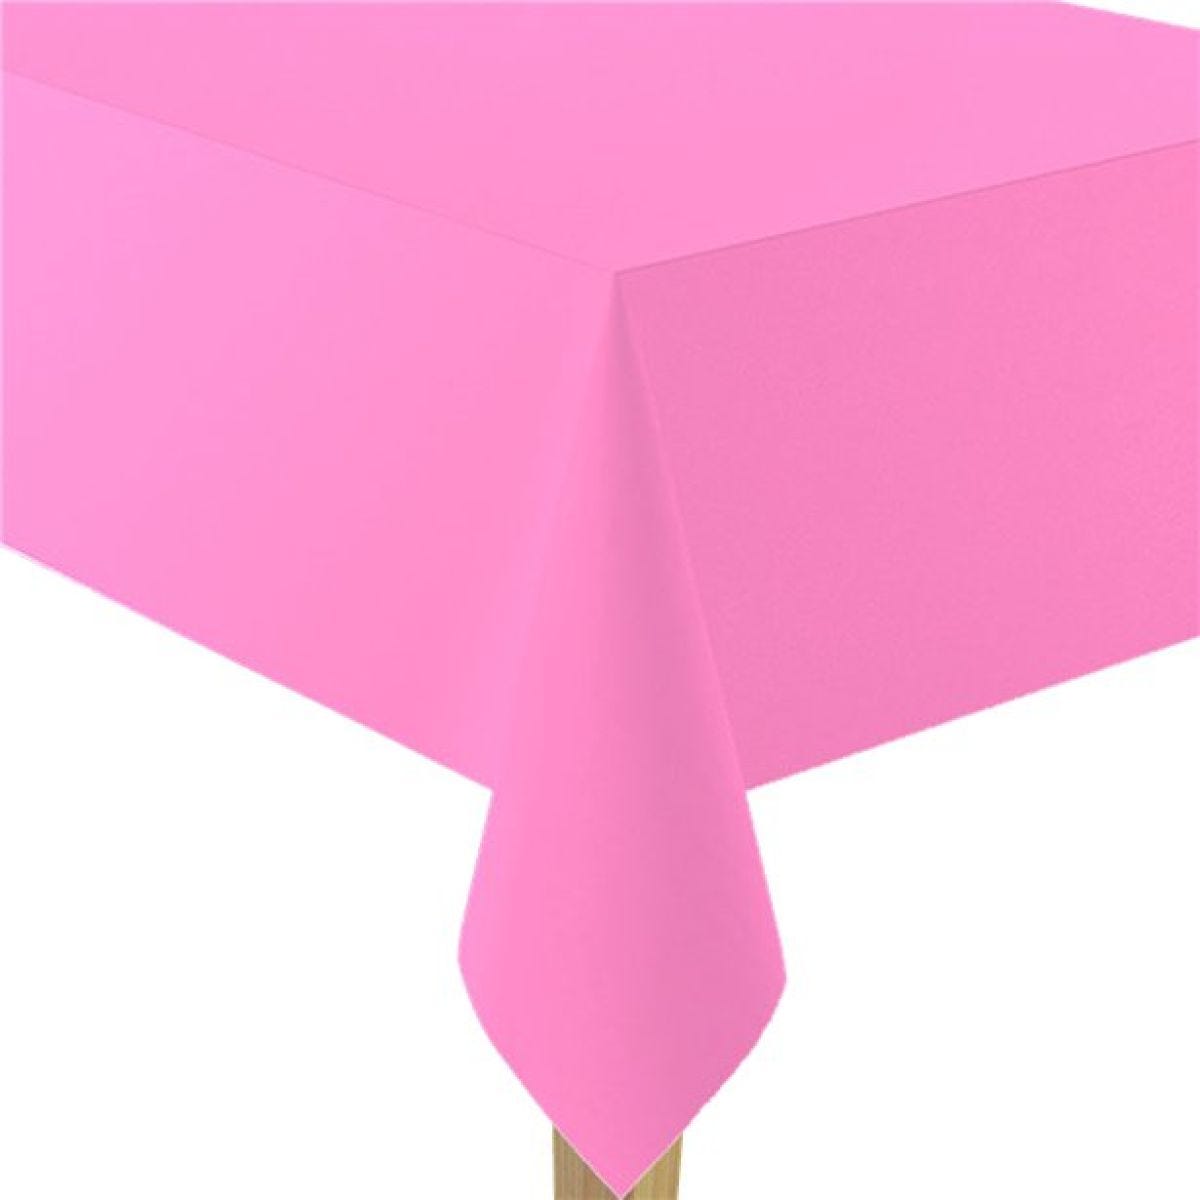 Bright Pink Paper Table Cover - 2.8m x 1.4m